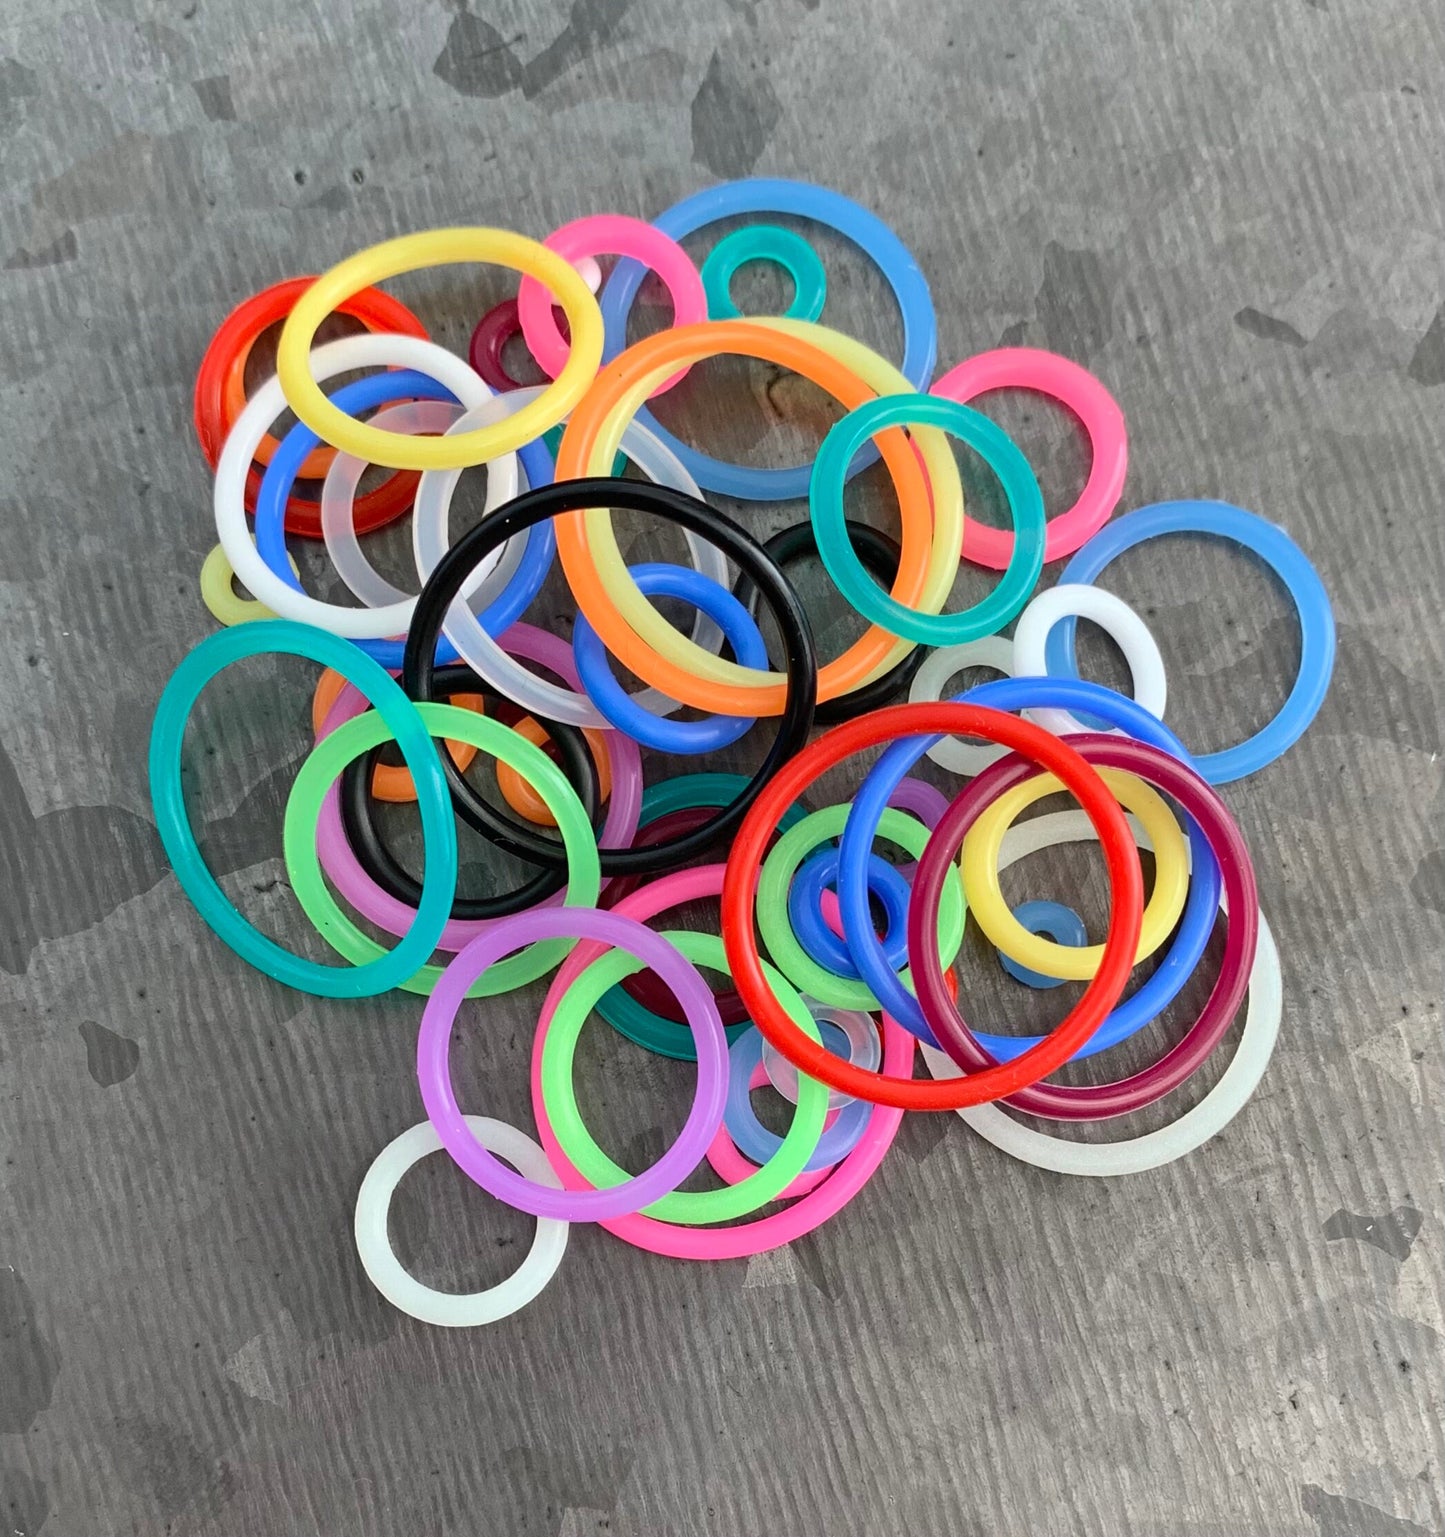 10 pack of Fuschia Replacement O-Rings Bands for Plugs or Tunnels - 13 more colors available!